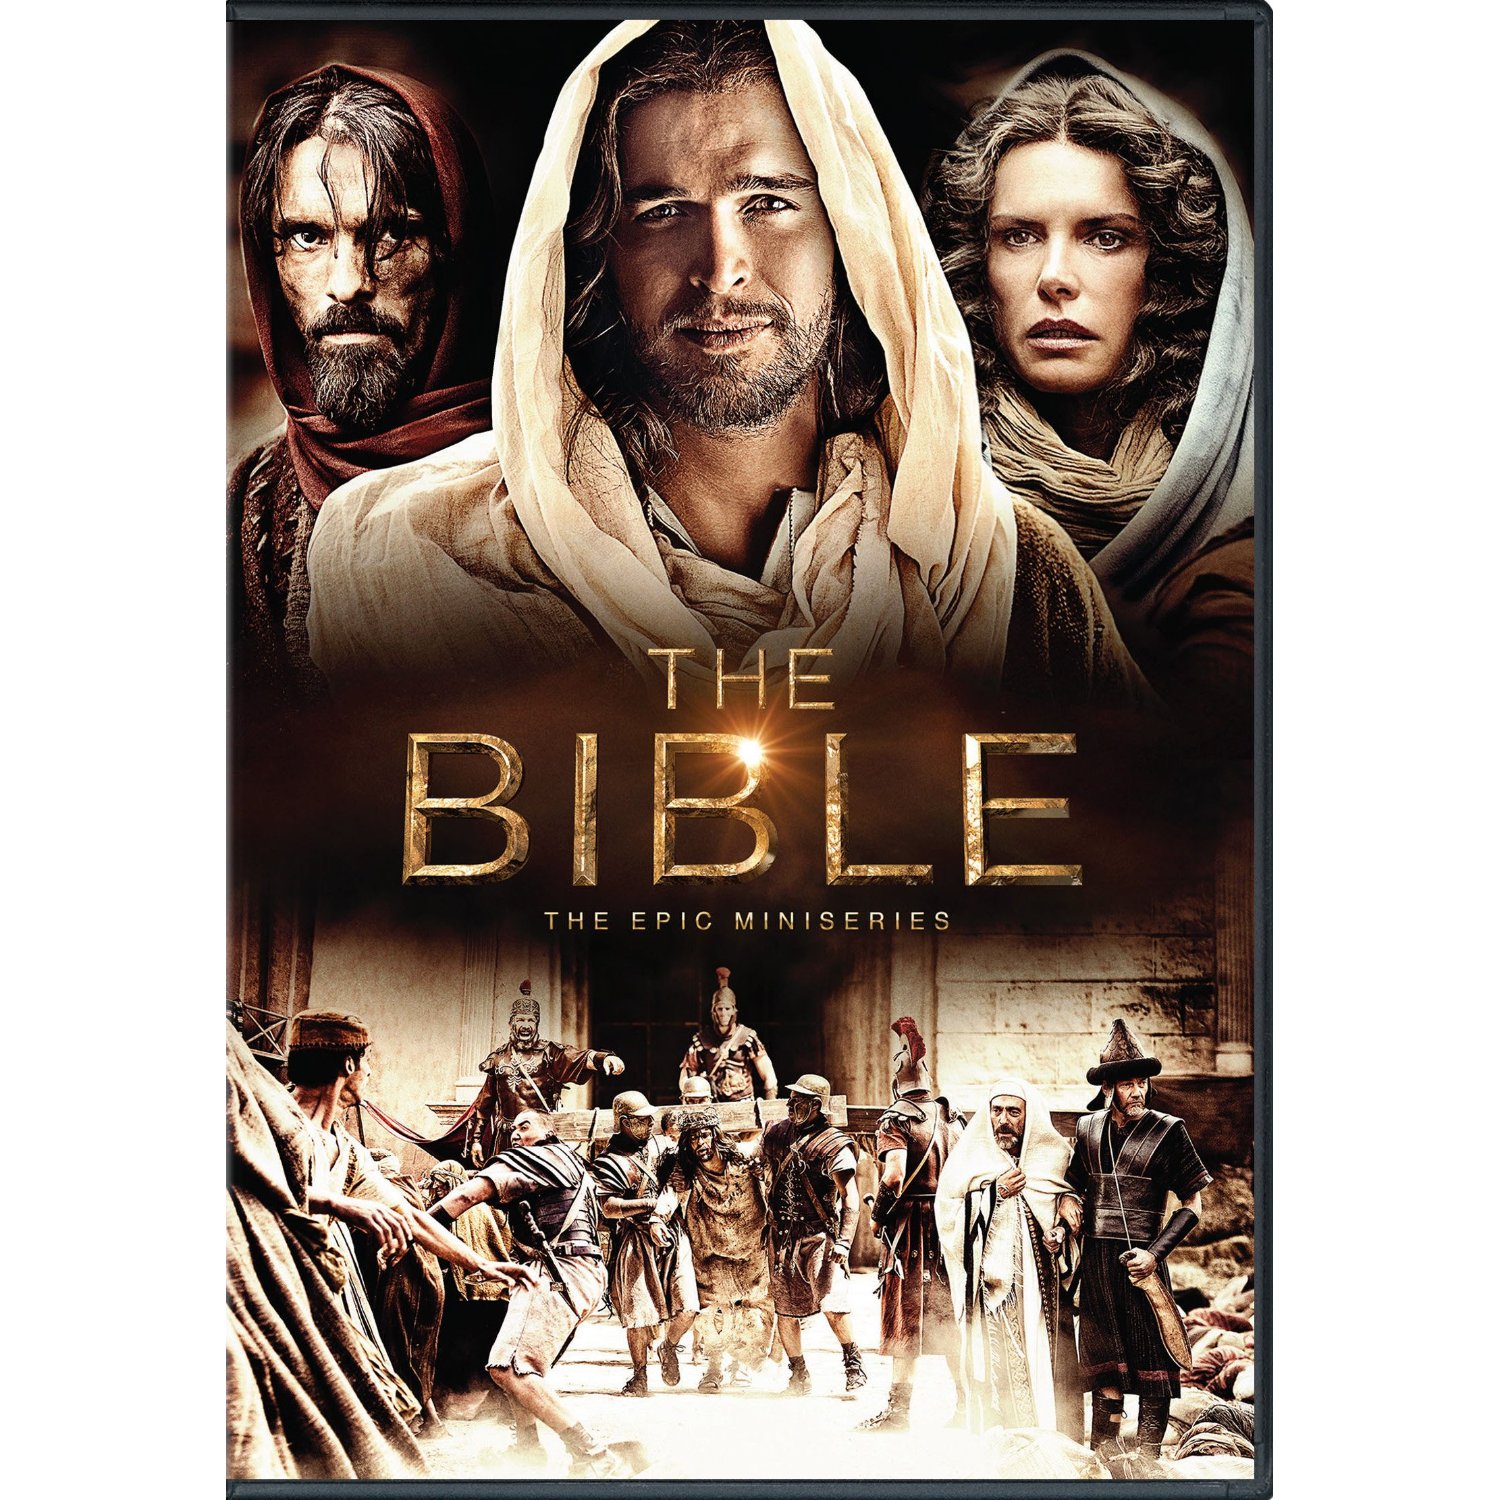 how many weeks is the bible on history channel